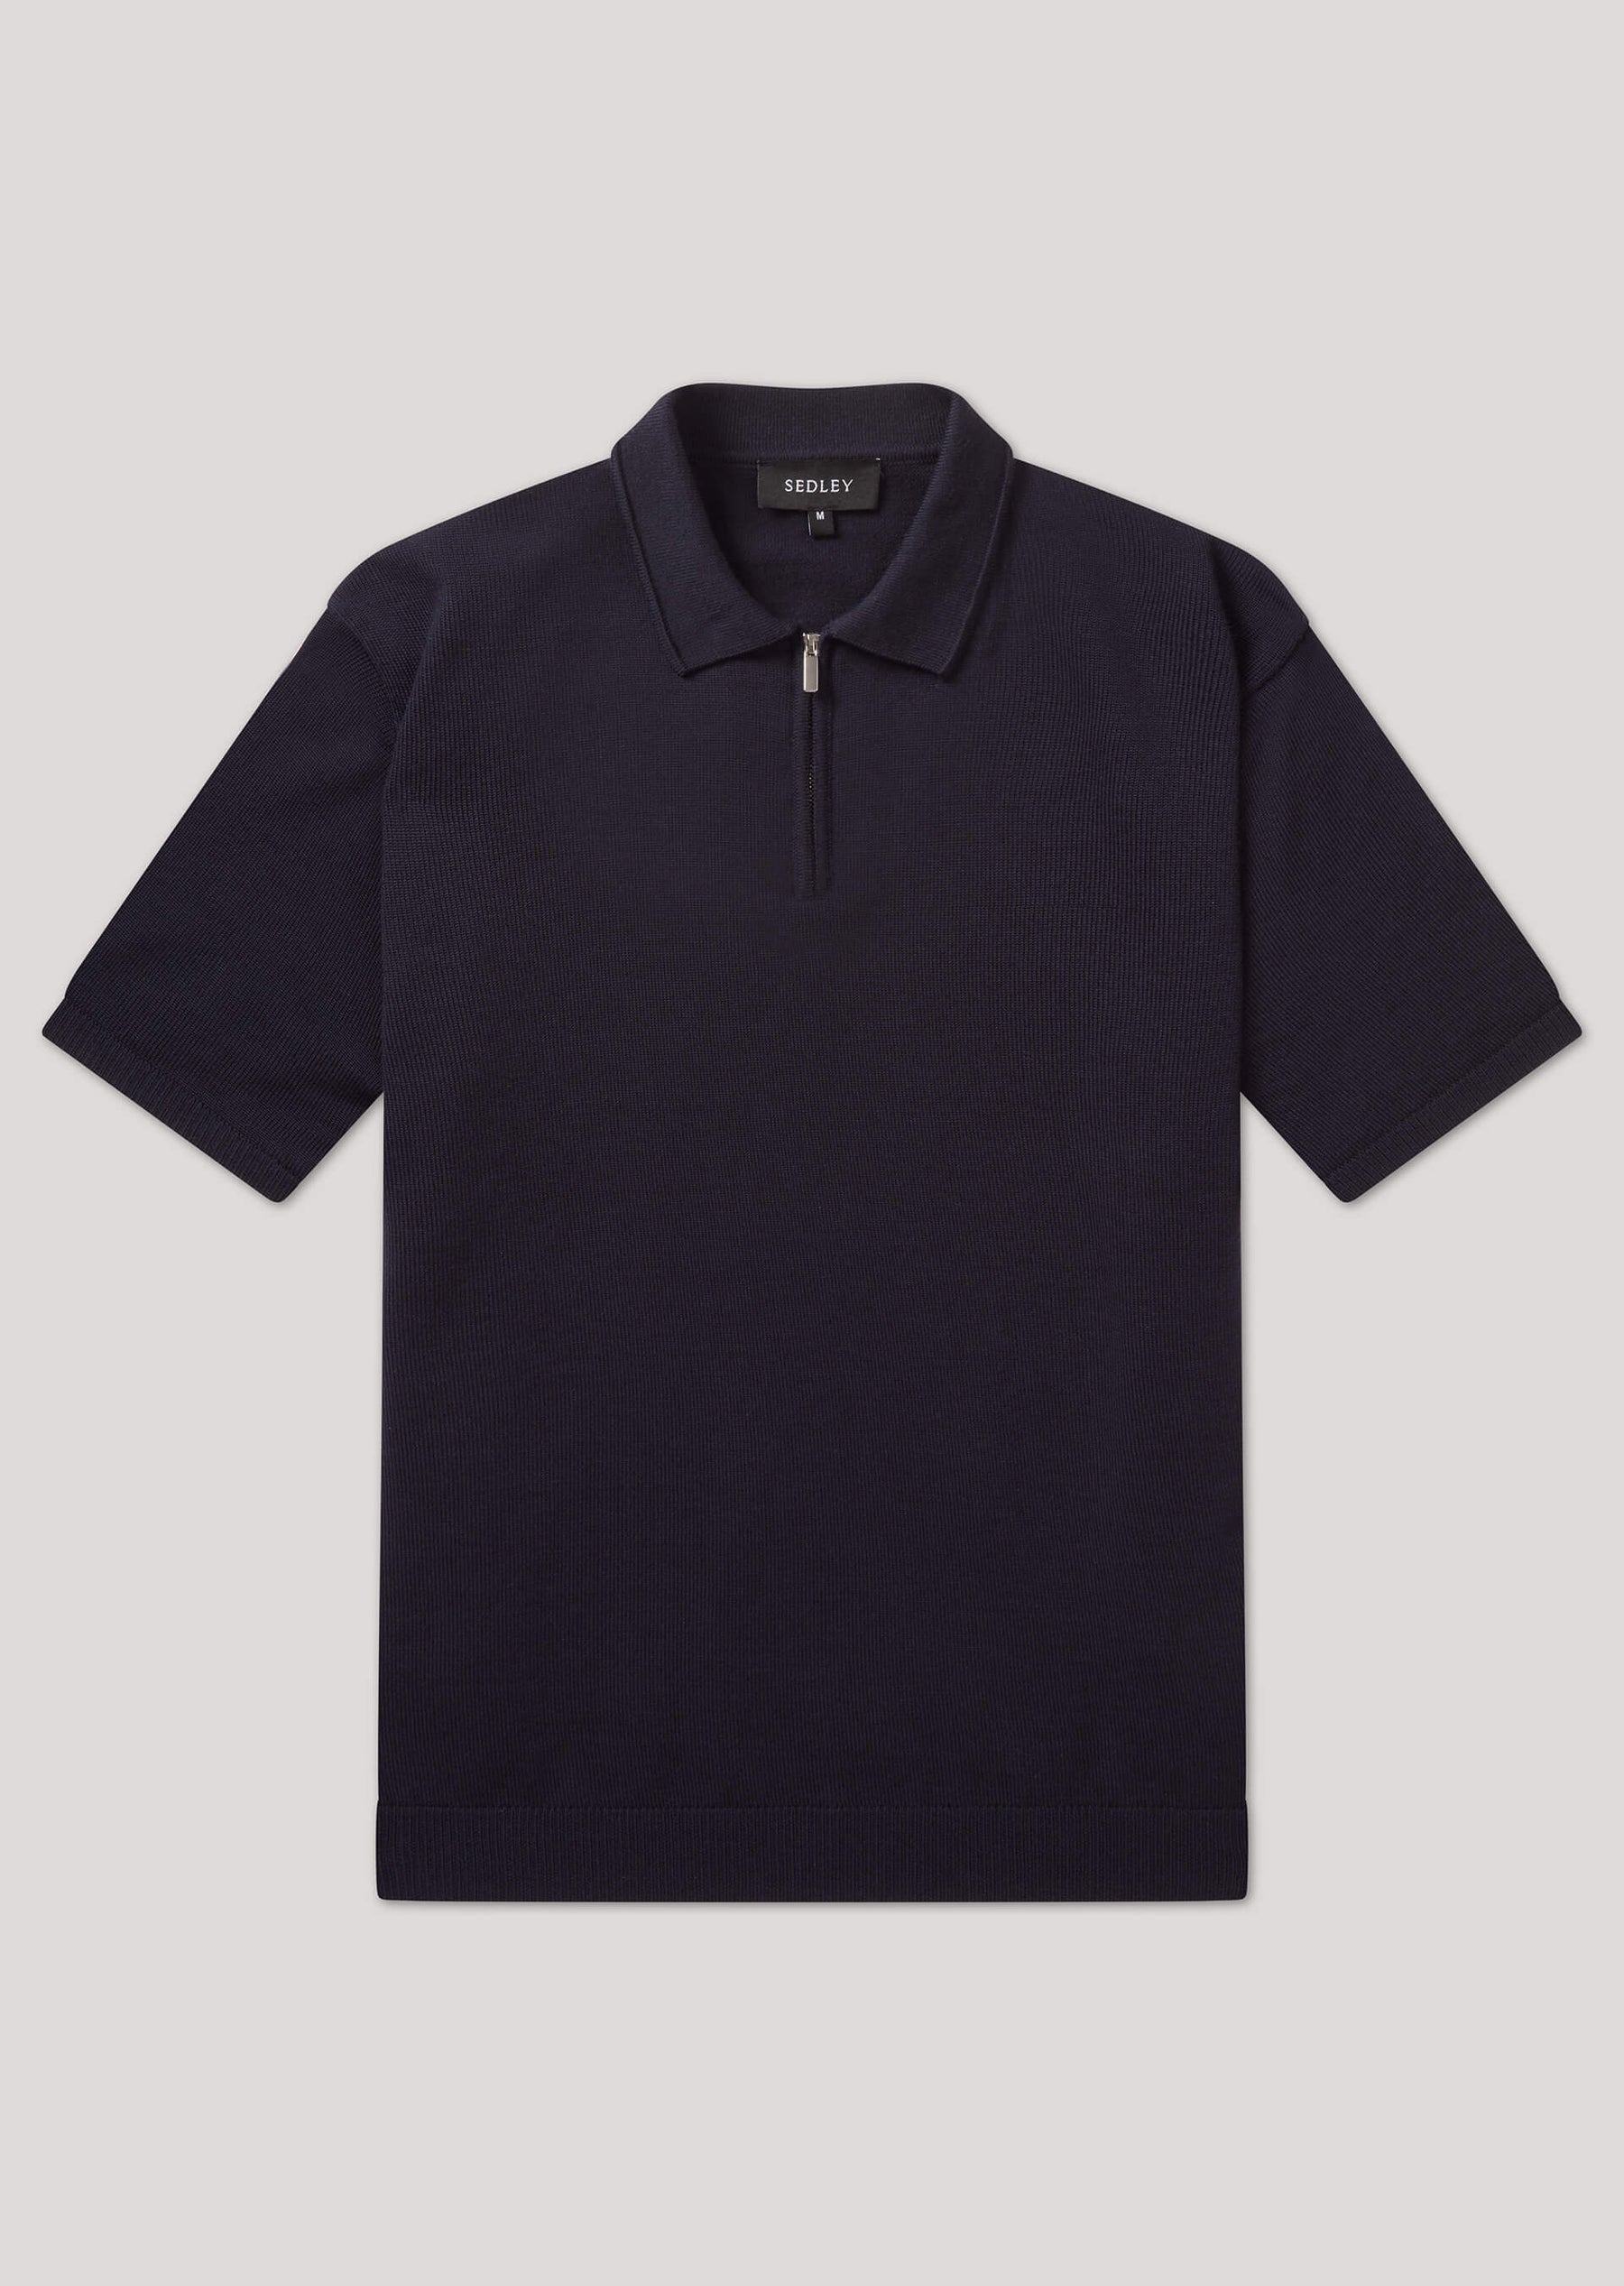 Jupp Navy Zip Up 100% Wool Knitted Polo